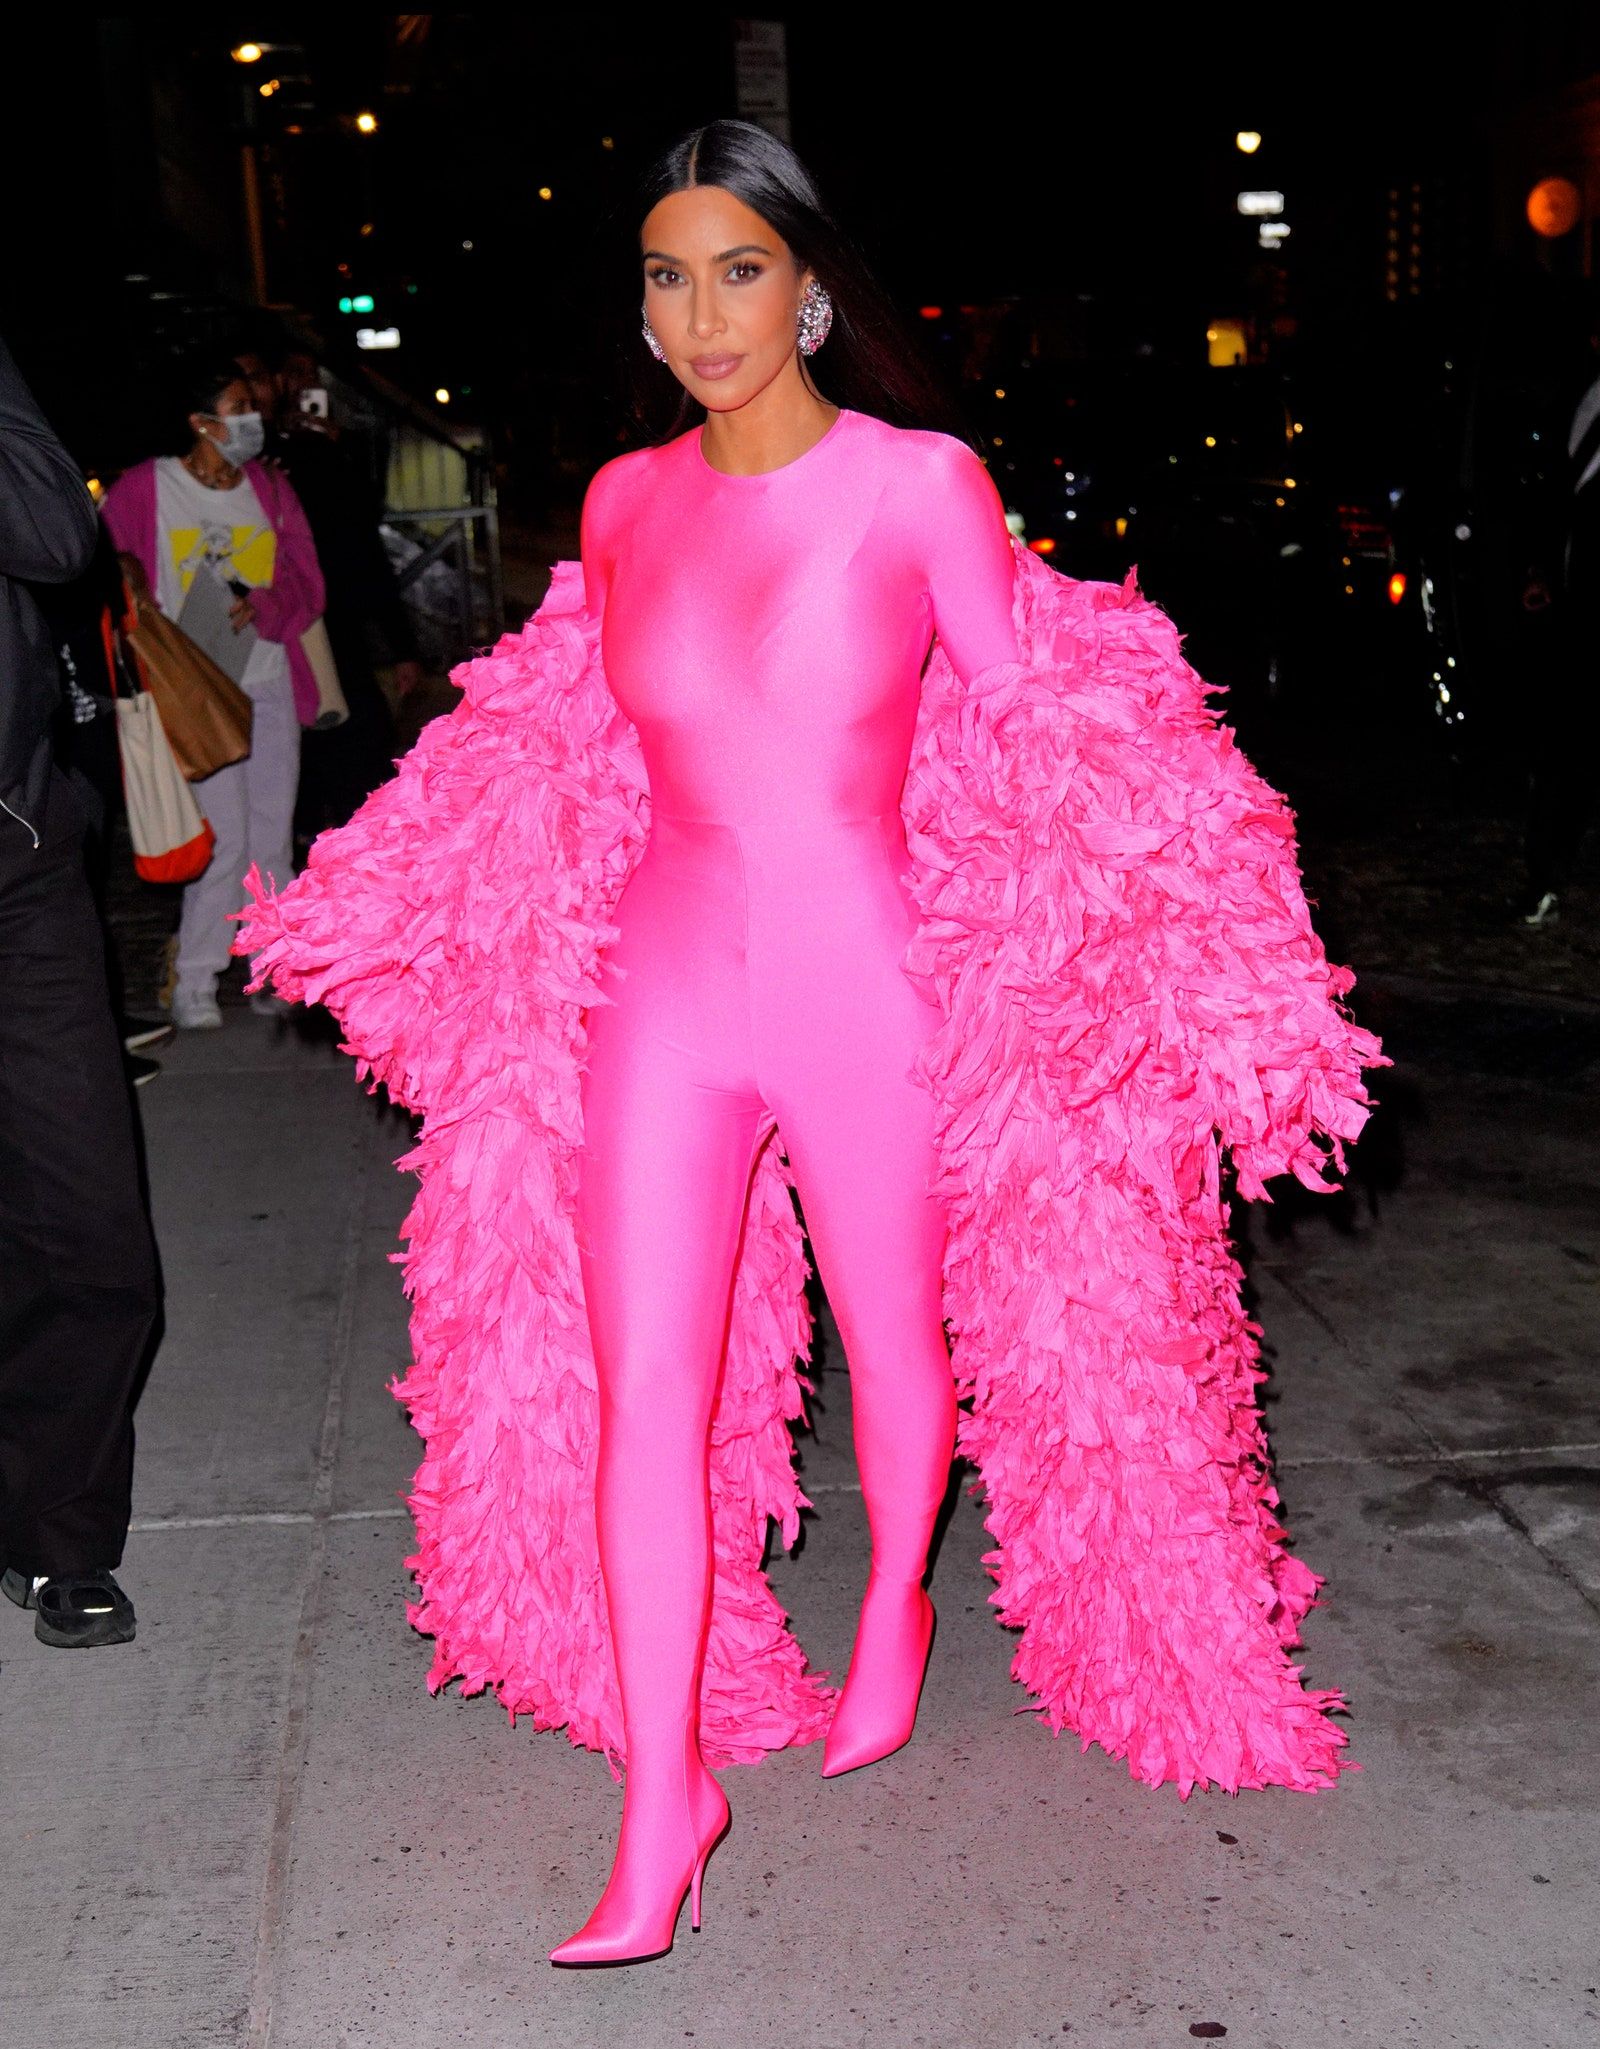 Hollywood Celeb Fashion Style Wear Trendy Hot Pink Color Outfit